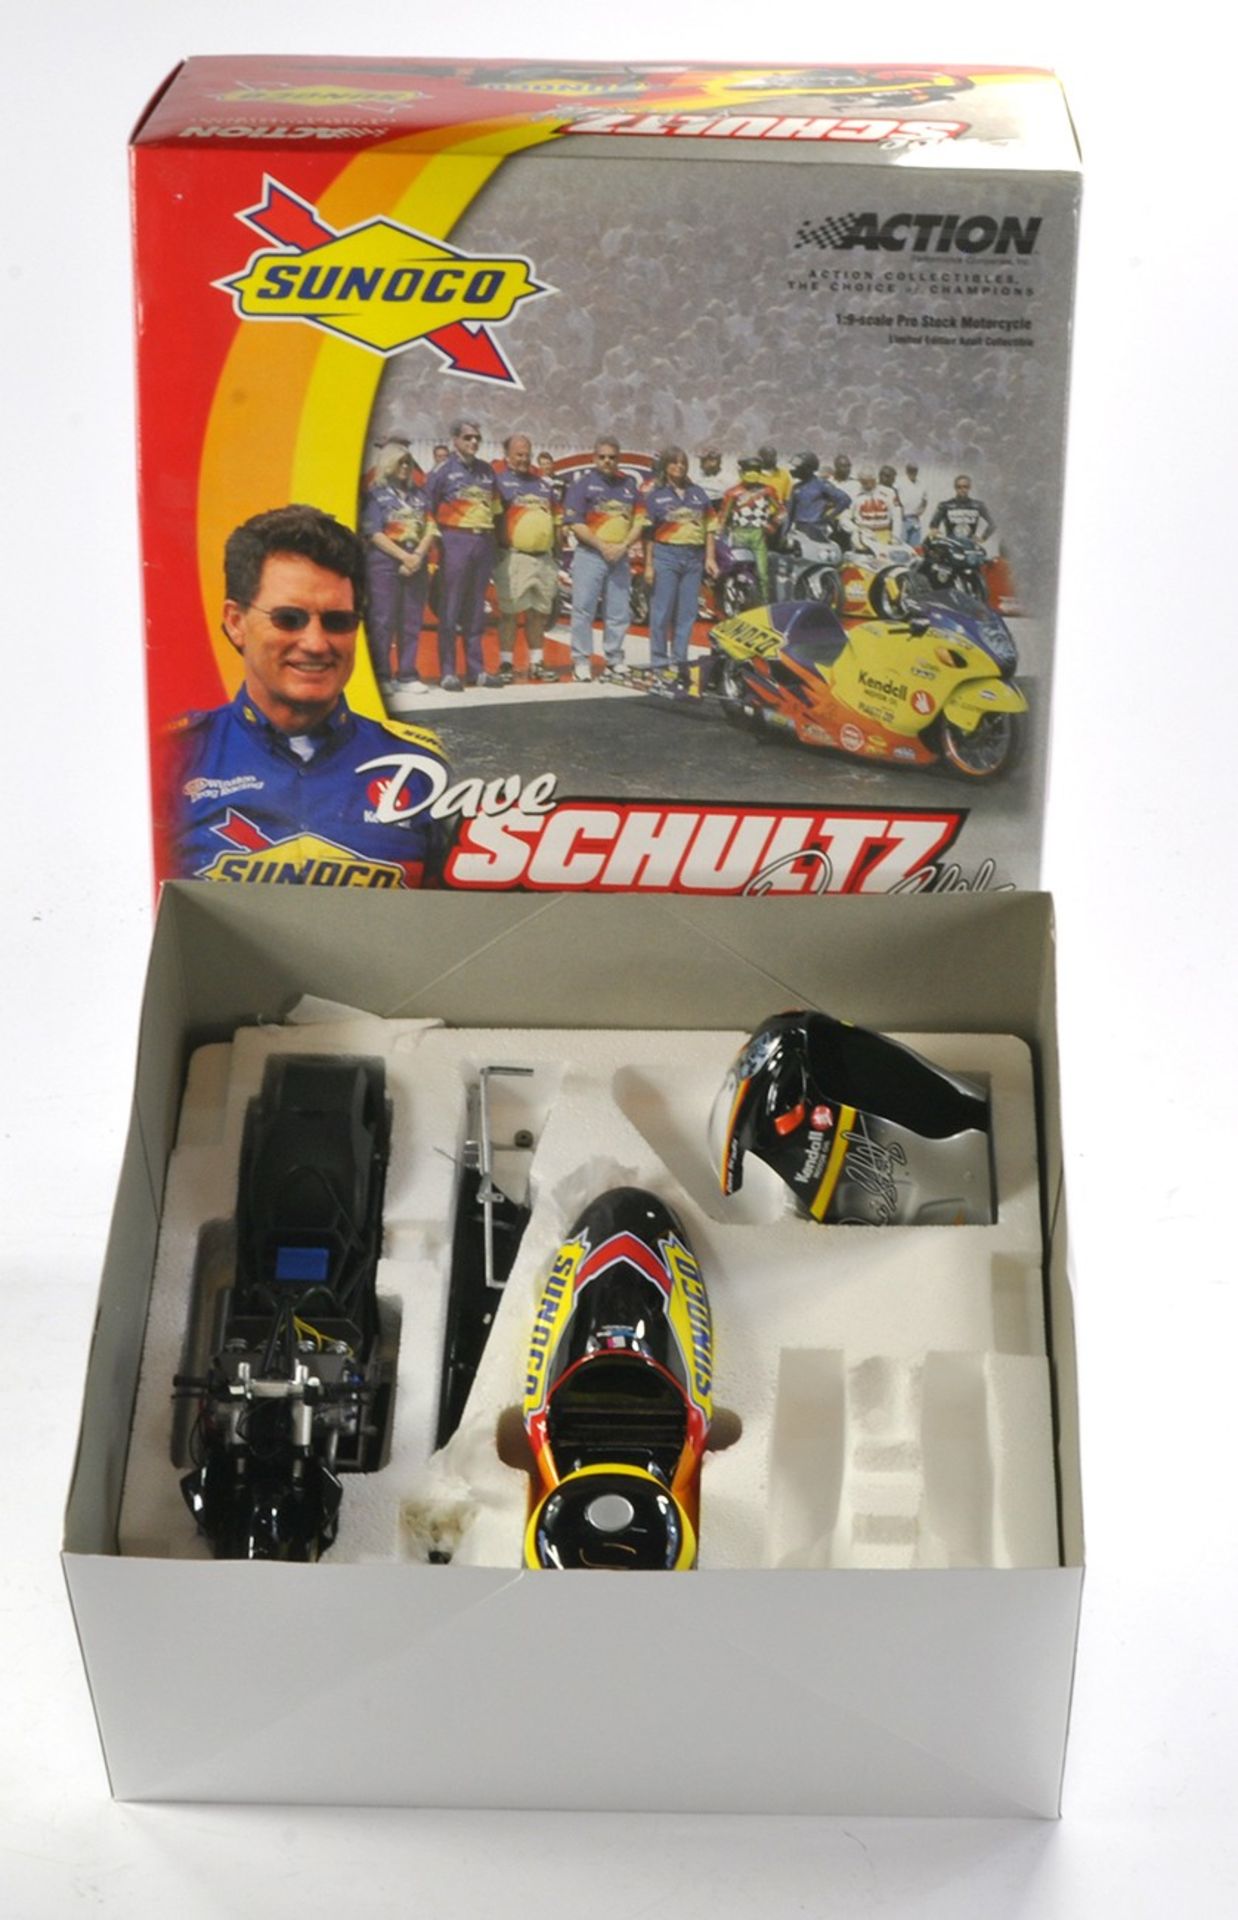 Action Collectibles 1/9 Pro Stock Motorcycle comprising Dave Schultz Sunoco Team. Looks to be